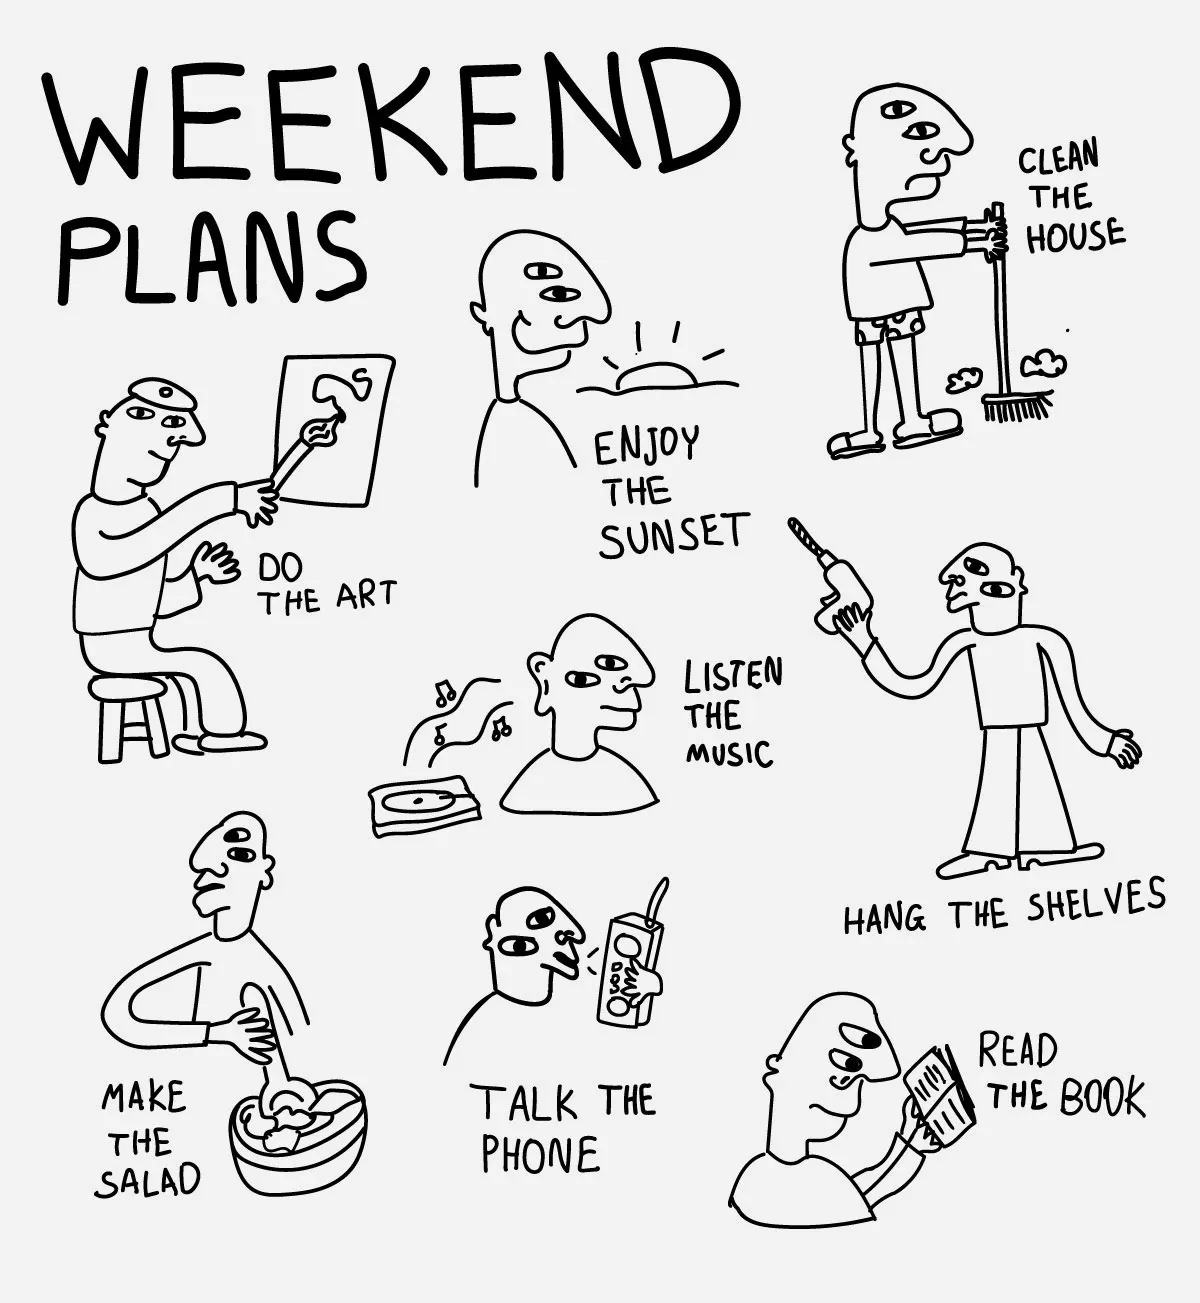 An illustration titled Weekend Plans with a man performing various tasks. Top left to right: 1. Do the art  2. Enjoy the sunset 3. Clean the house. Middle left to right: 4. Listen the music 5. Hang the shelves. Bottom left to right: 6. Make the salad 7. Talk the phone 8. Read the book.